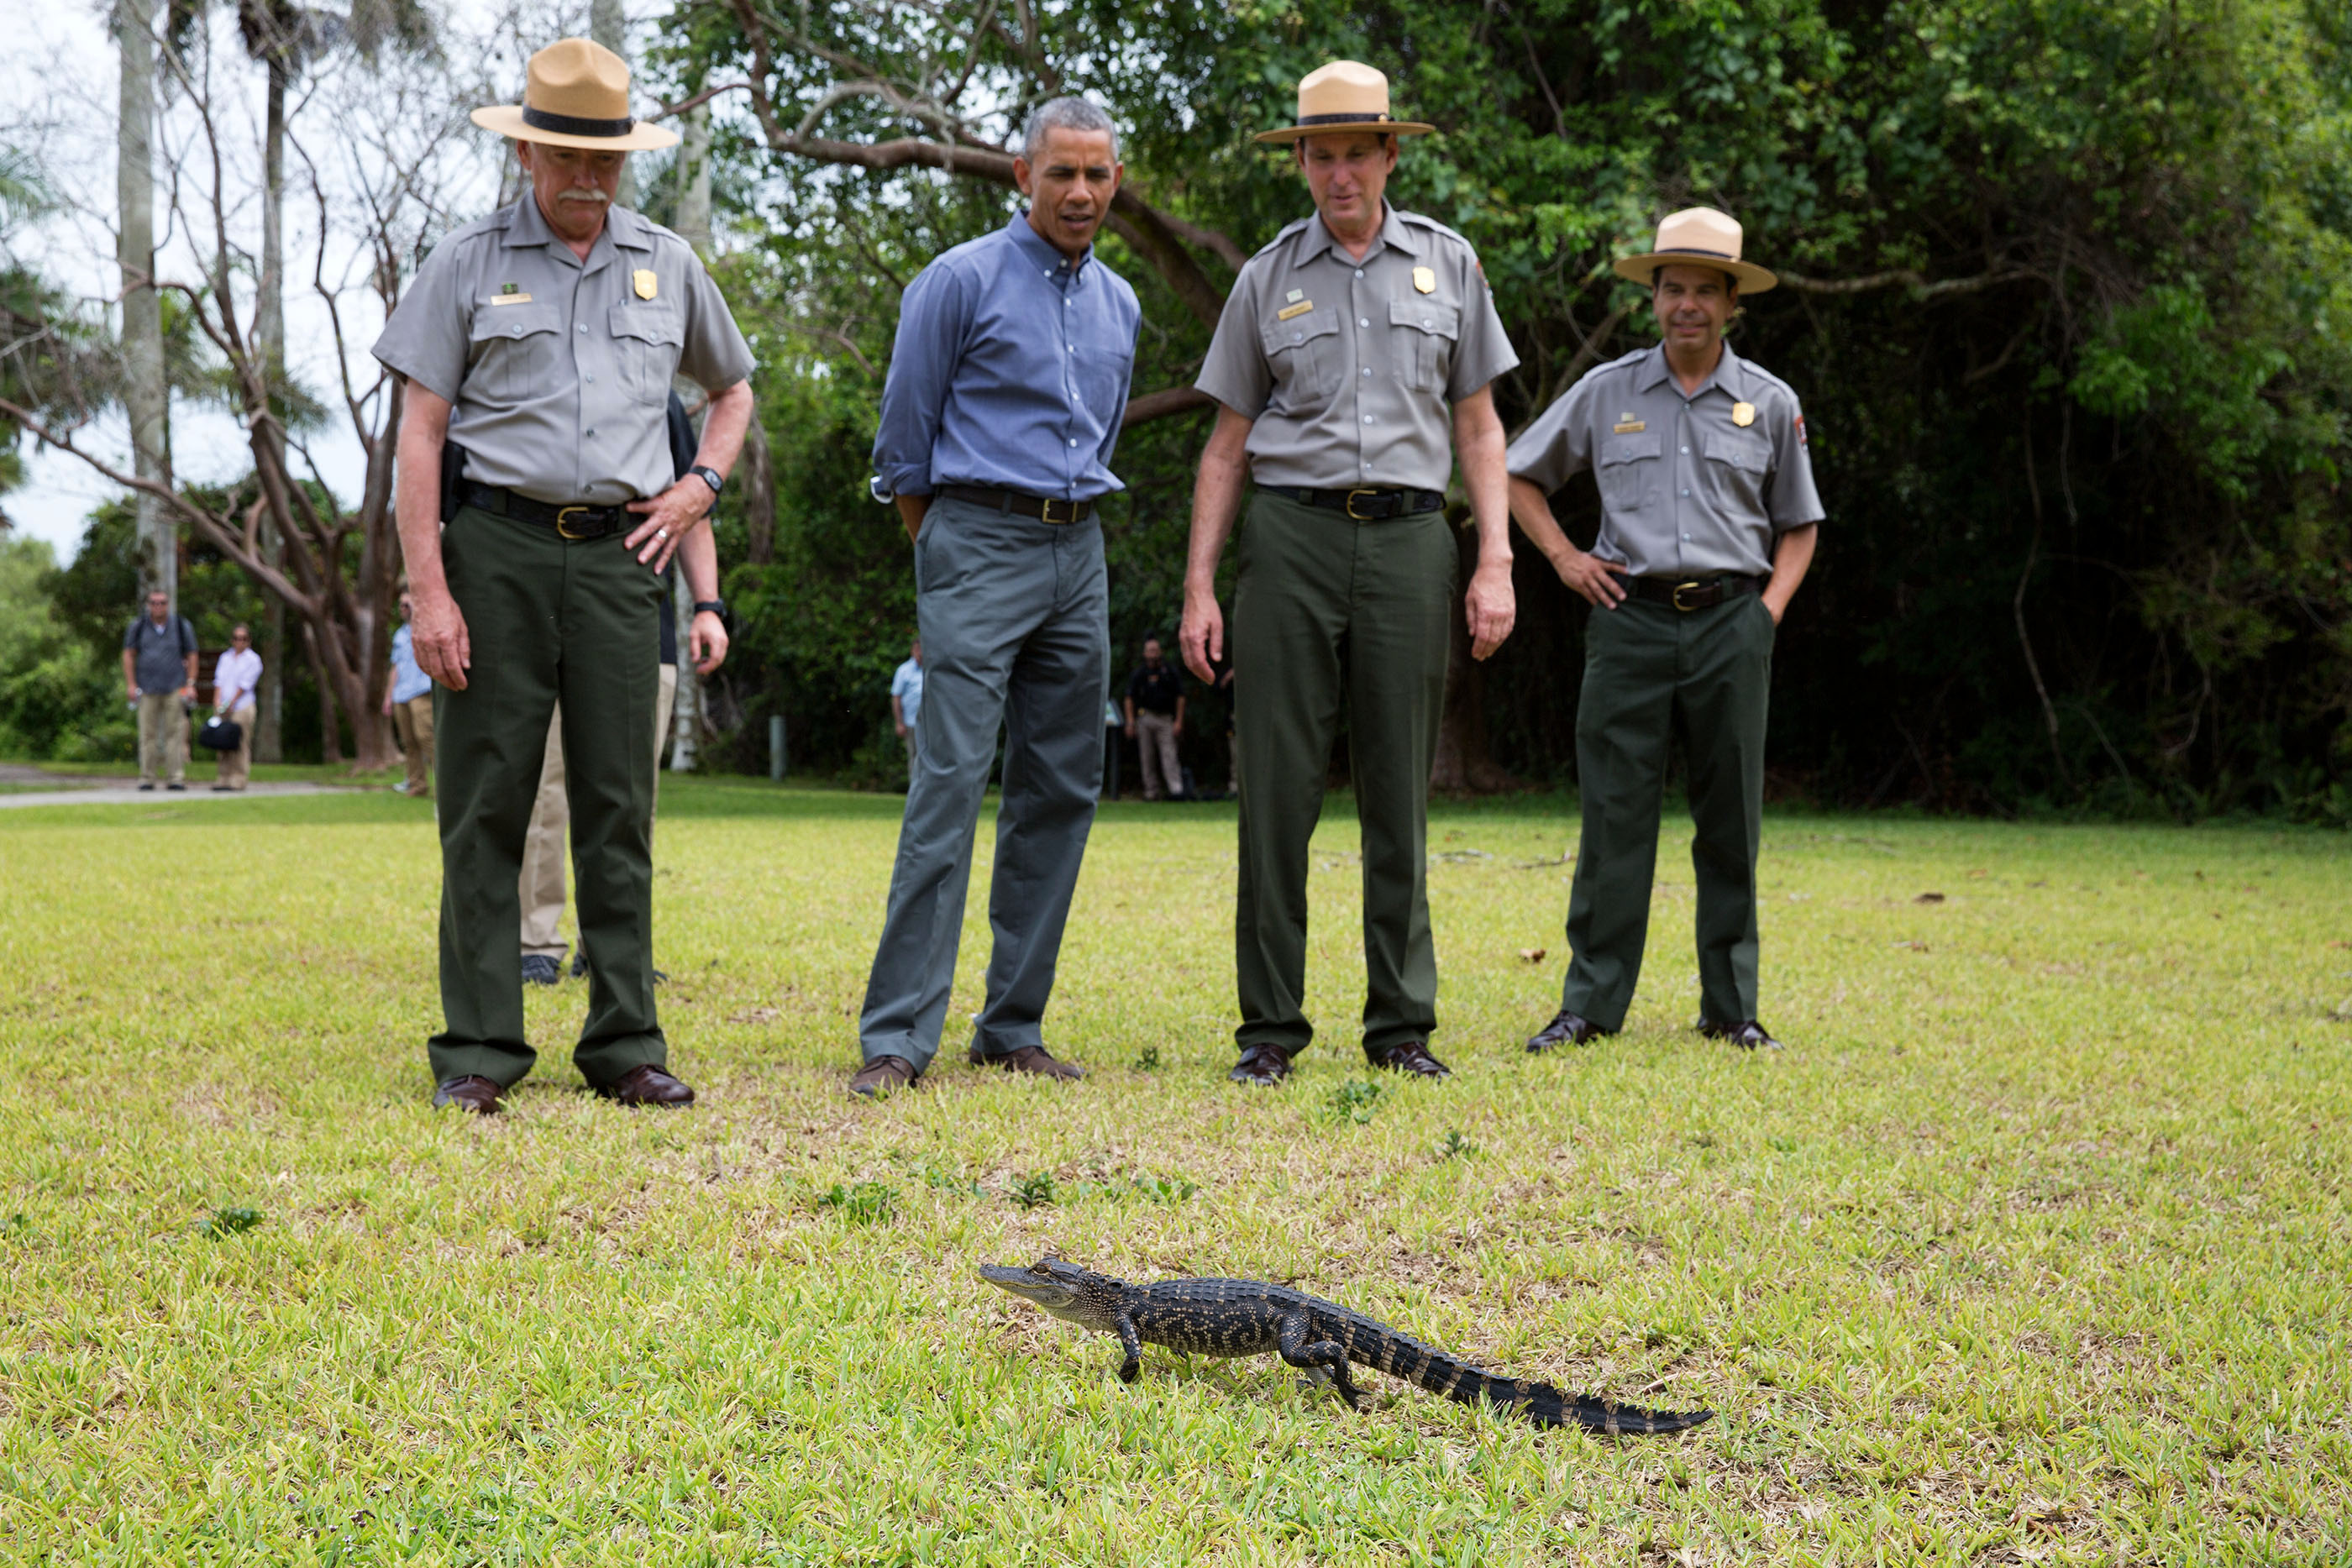 Florida, April 22, 2015. Keeping his distance from a baby alligator on Earth Day at Everglades National Park. (Official White House Photo by Pete Souza)